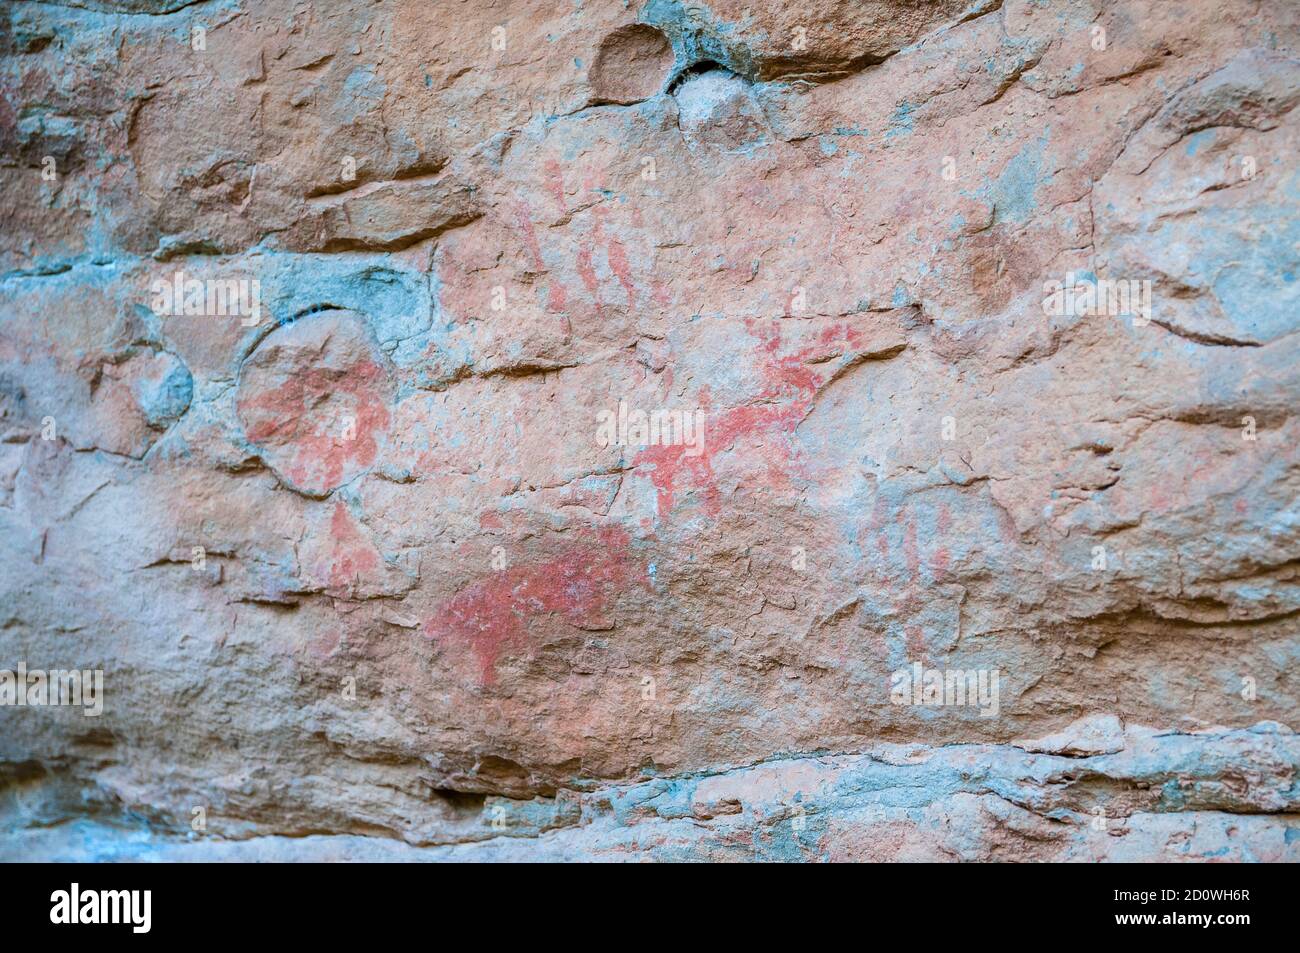 cave paintings, quadrupeds, star-shaped representations and bars, Sant Fruitós de Bages, Catalonia, Spain Stock Photo